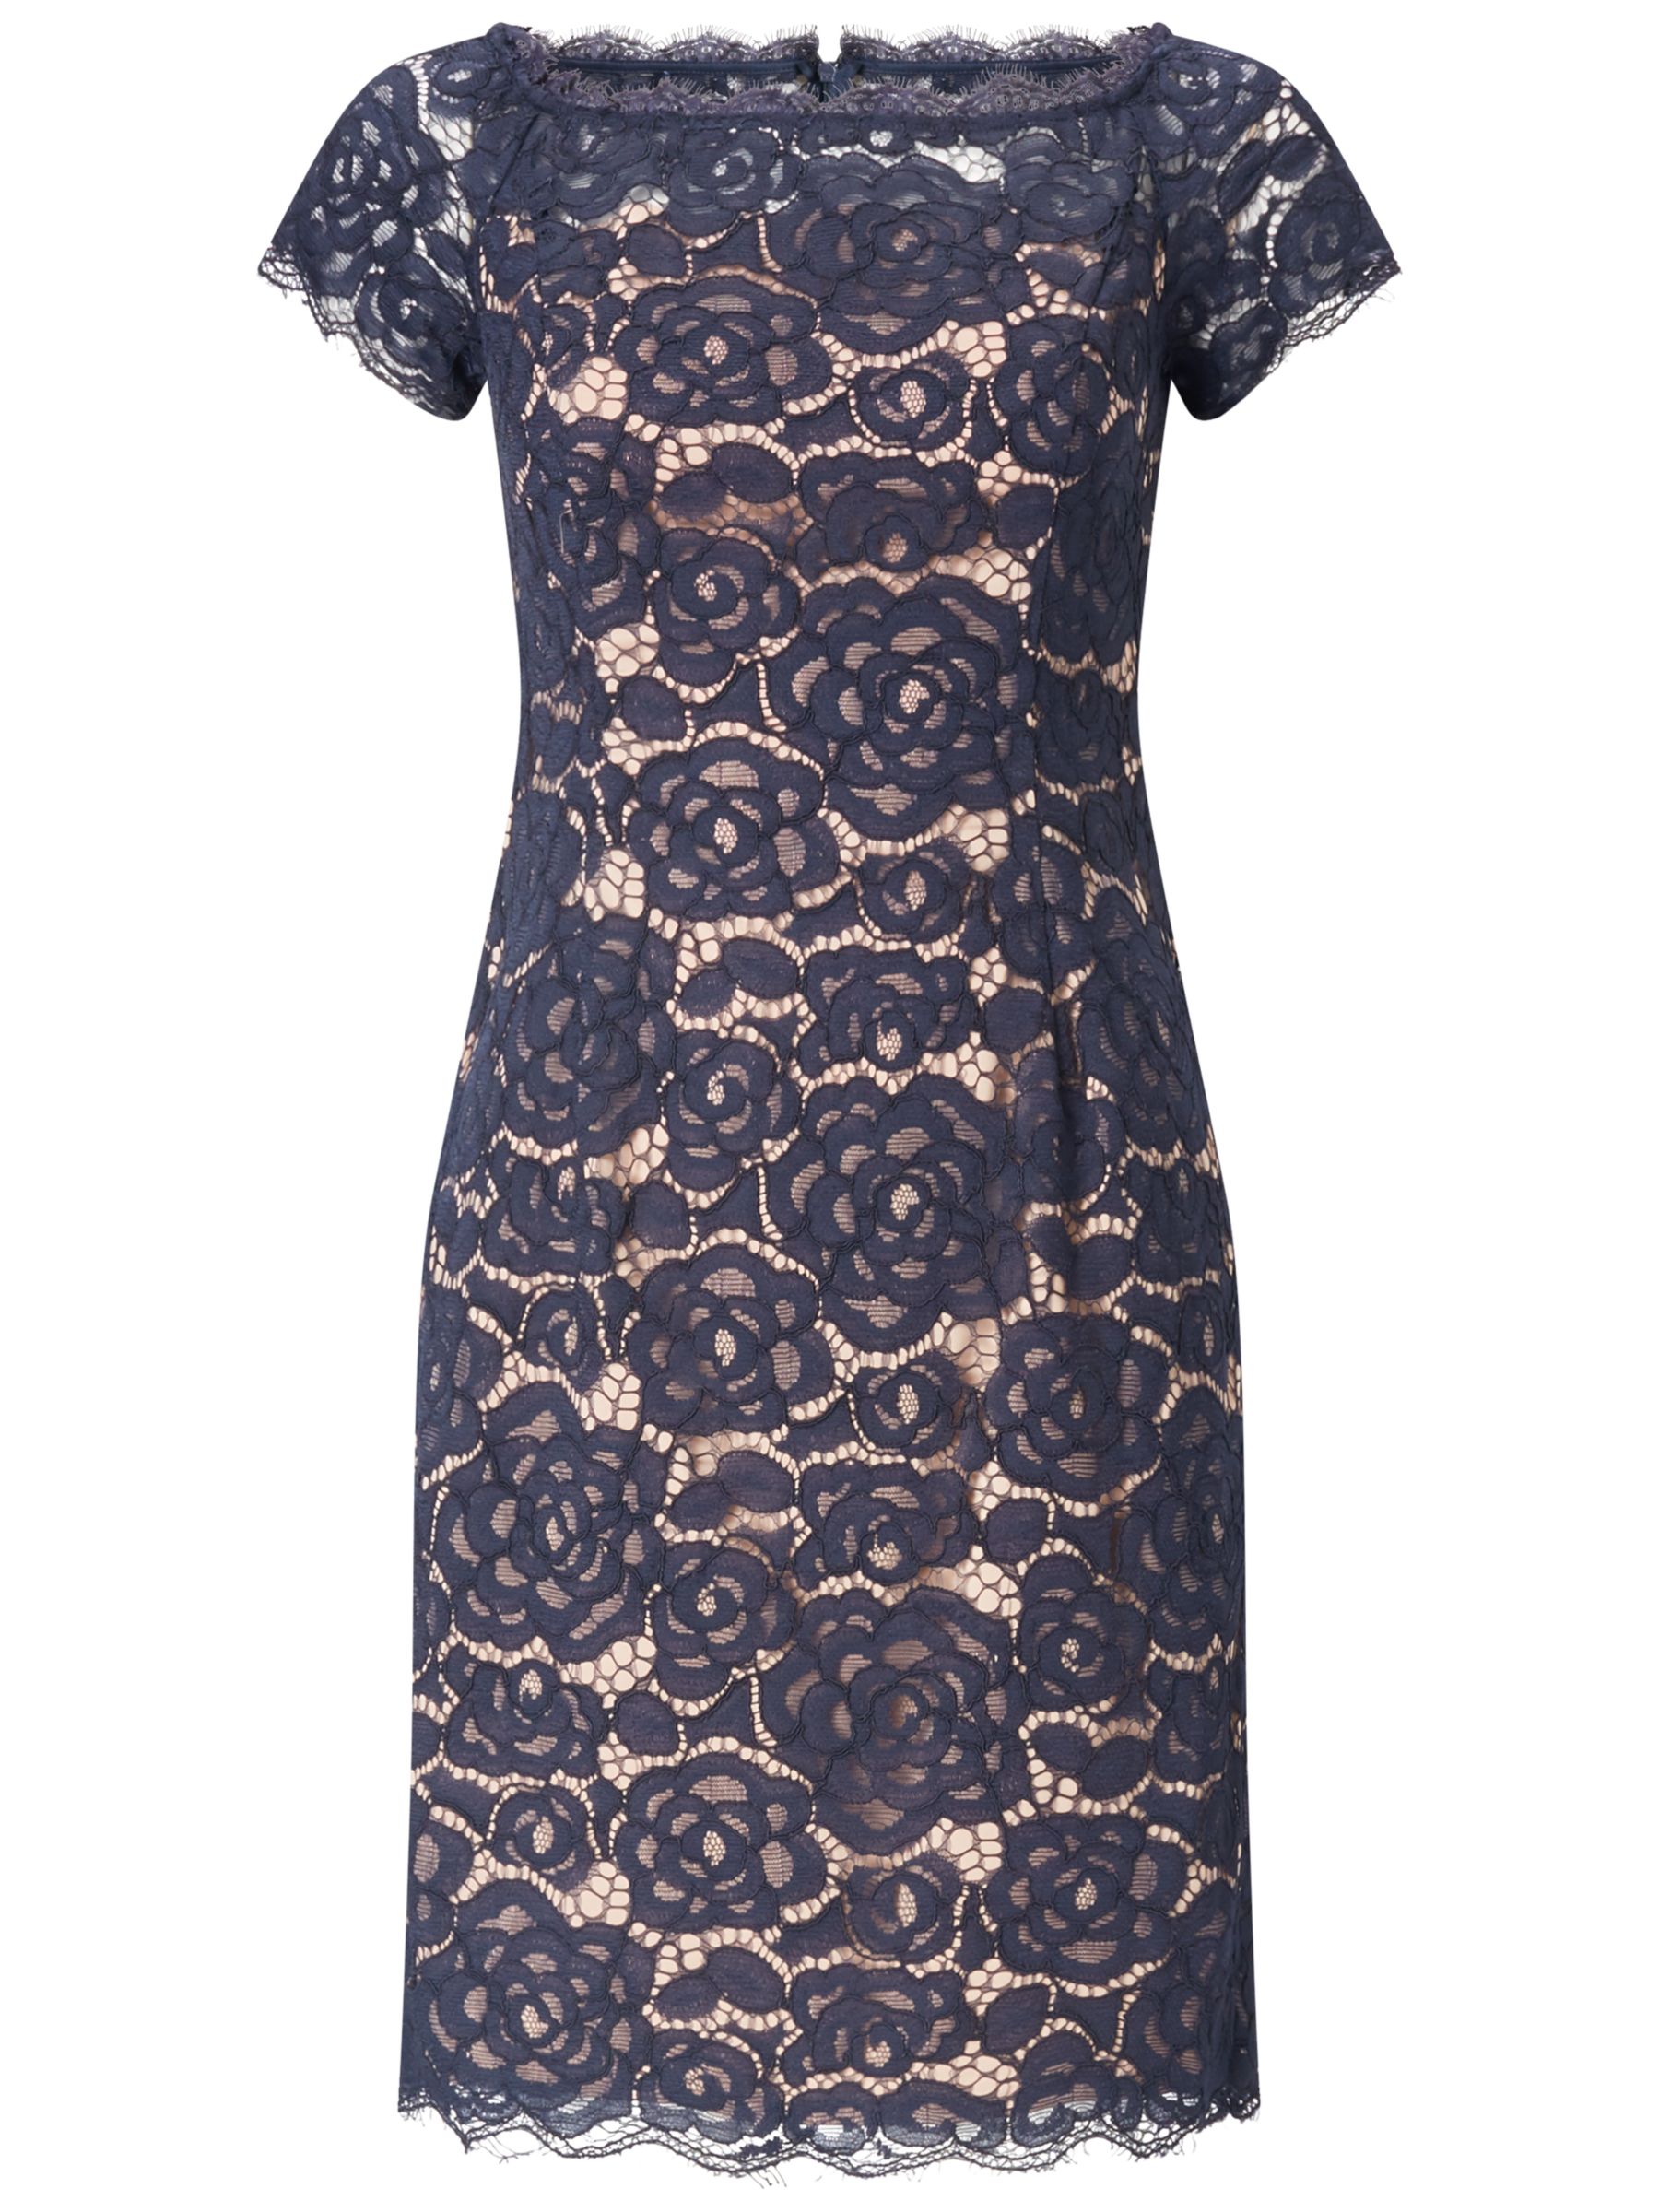 Adrianna Papell Off Shoulder Lace Sheath Dress, Midnight Blue/Pale Pink